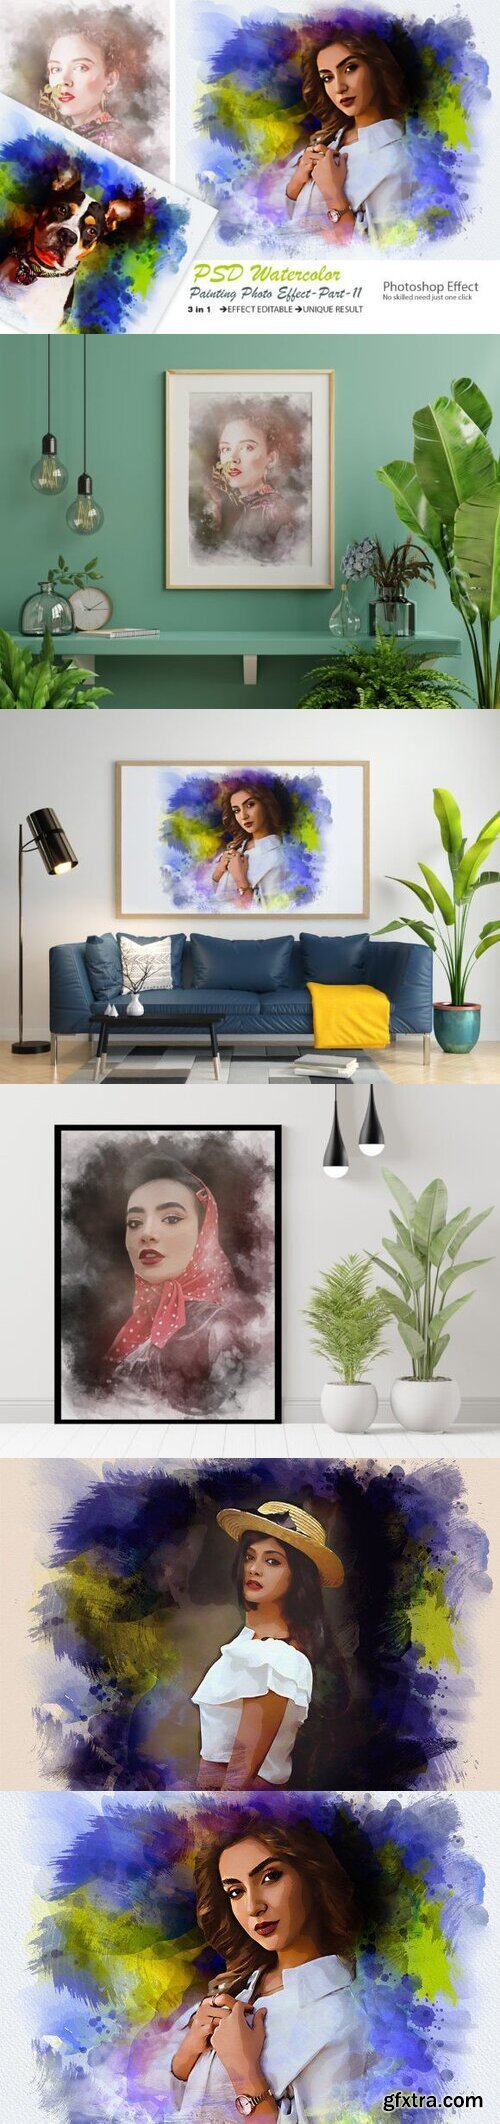 PSD Watercolor Painting Photo Effect